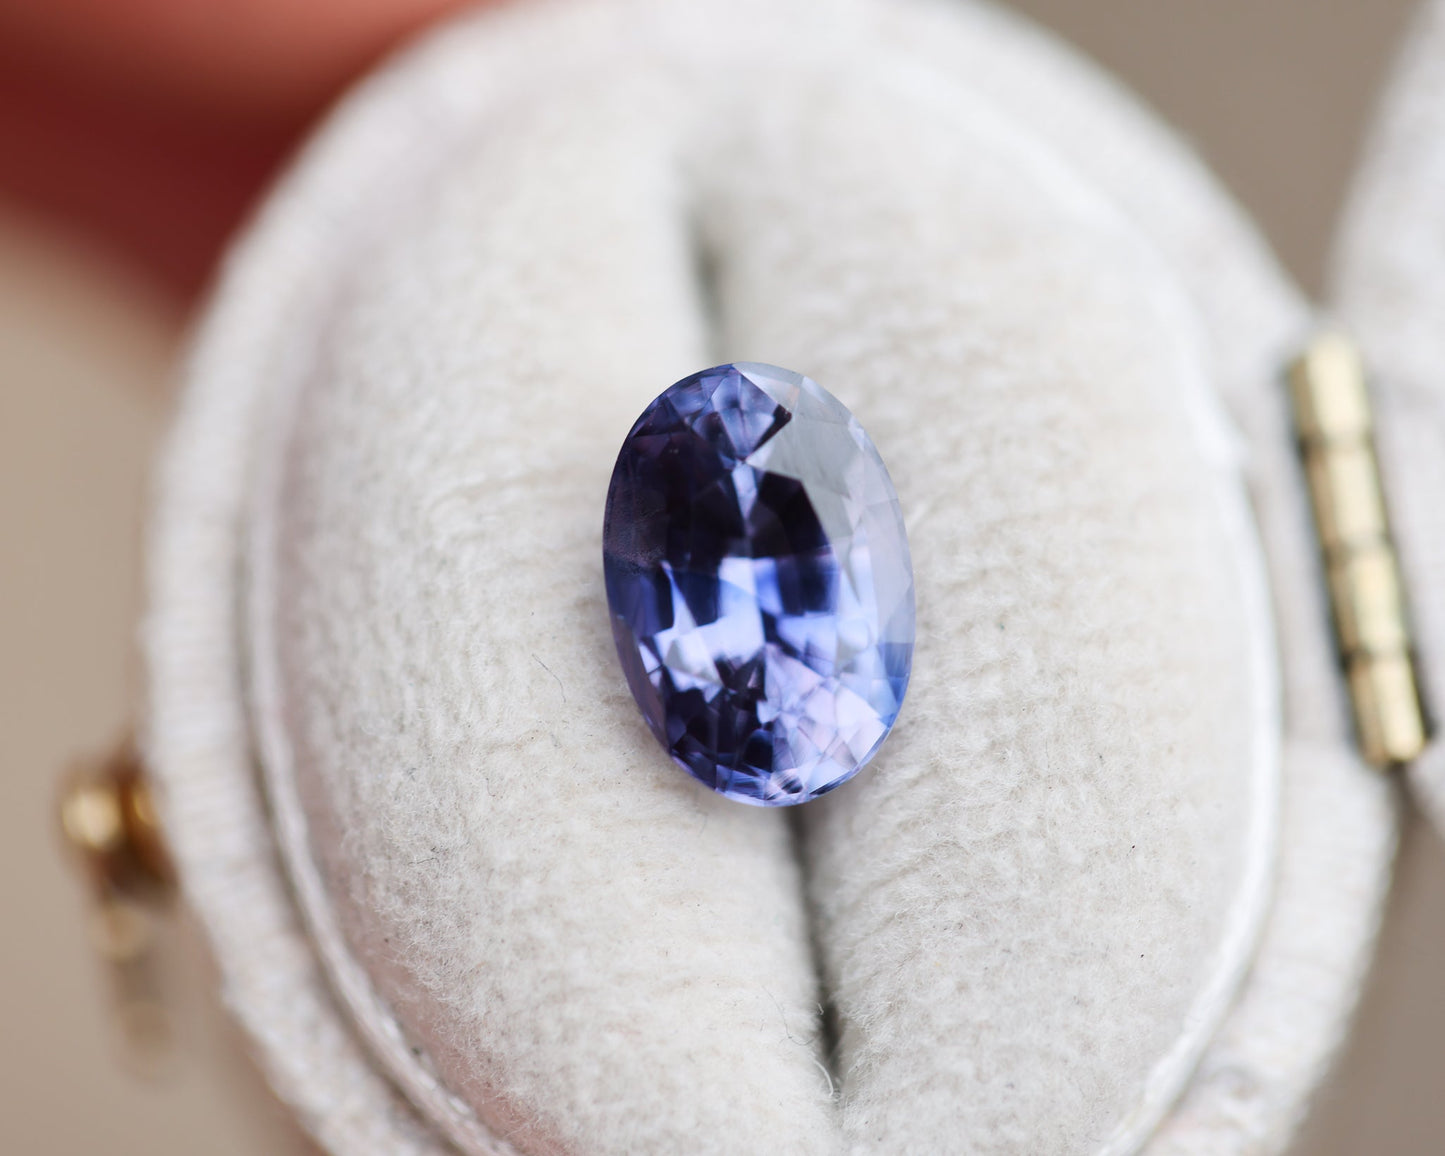 Load image into Gallery viewer, 3.04ct oval violet purple/blue sapphire
